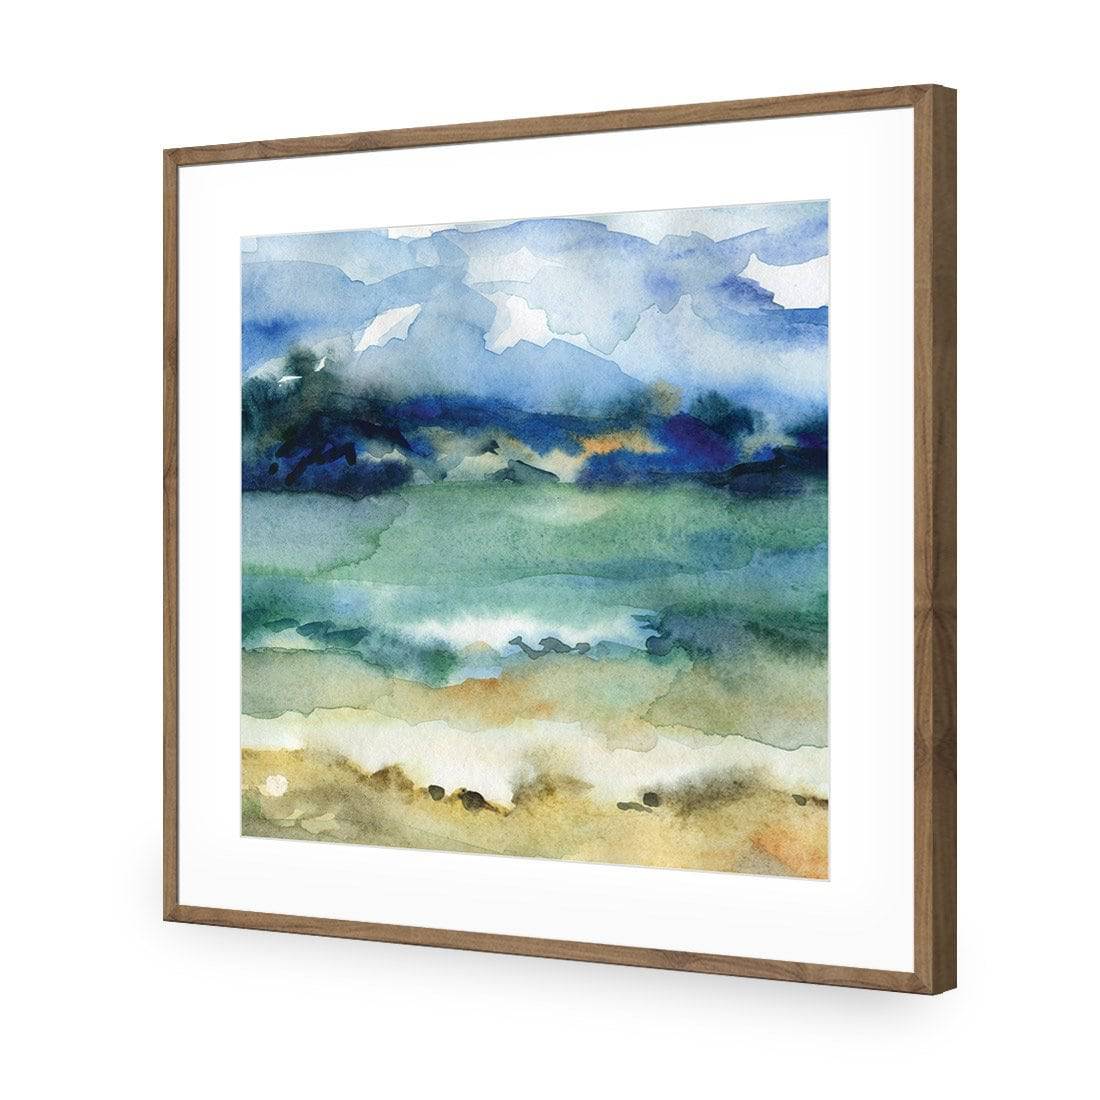 Timeless, Square-Acrylic-Wall Art Design-With Border-Acrylic - Natural Frame-37x37cm-Wall Art Designs